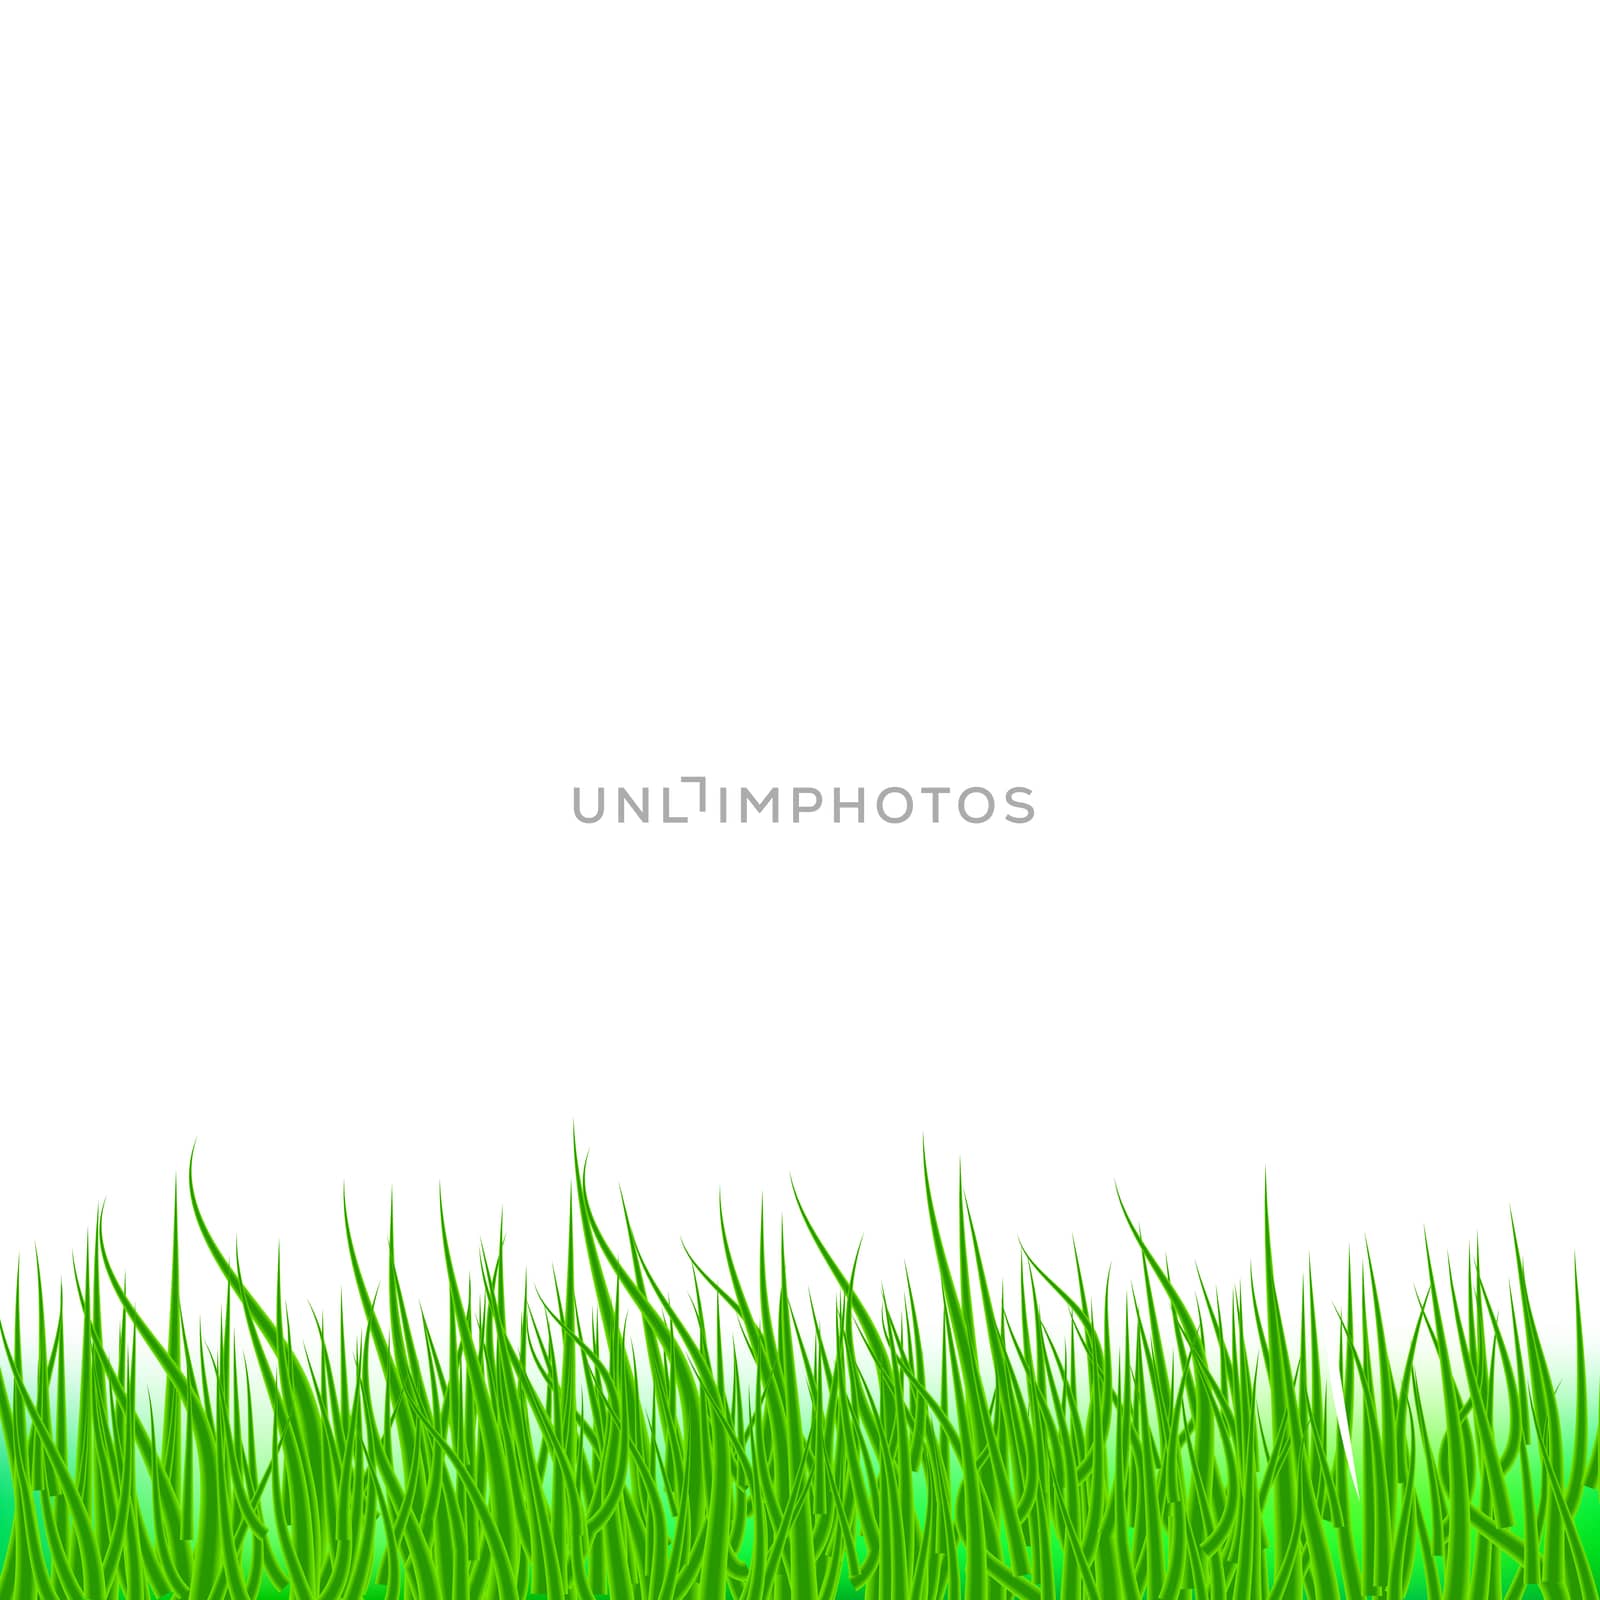 Lawn green grass abstract natural background. The edging plants. Natural border design